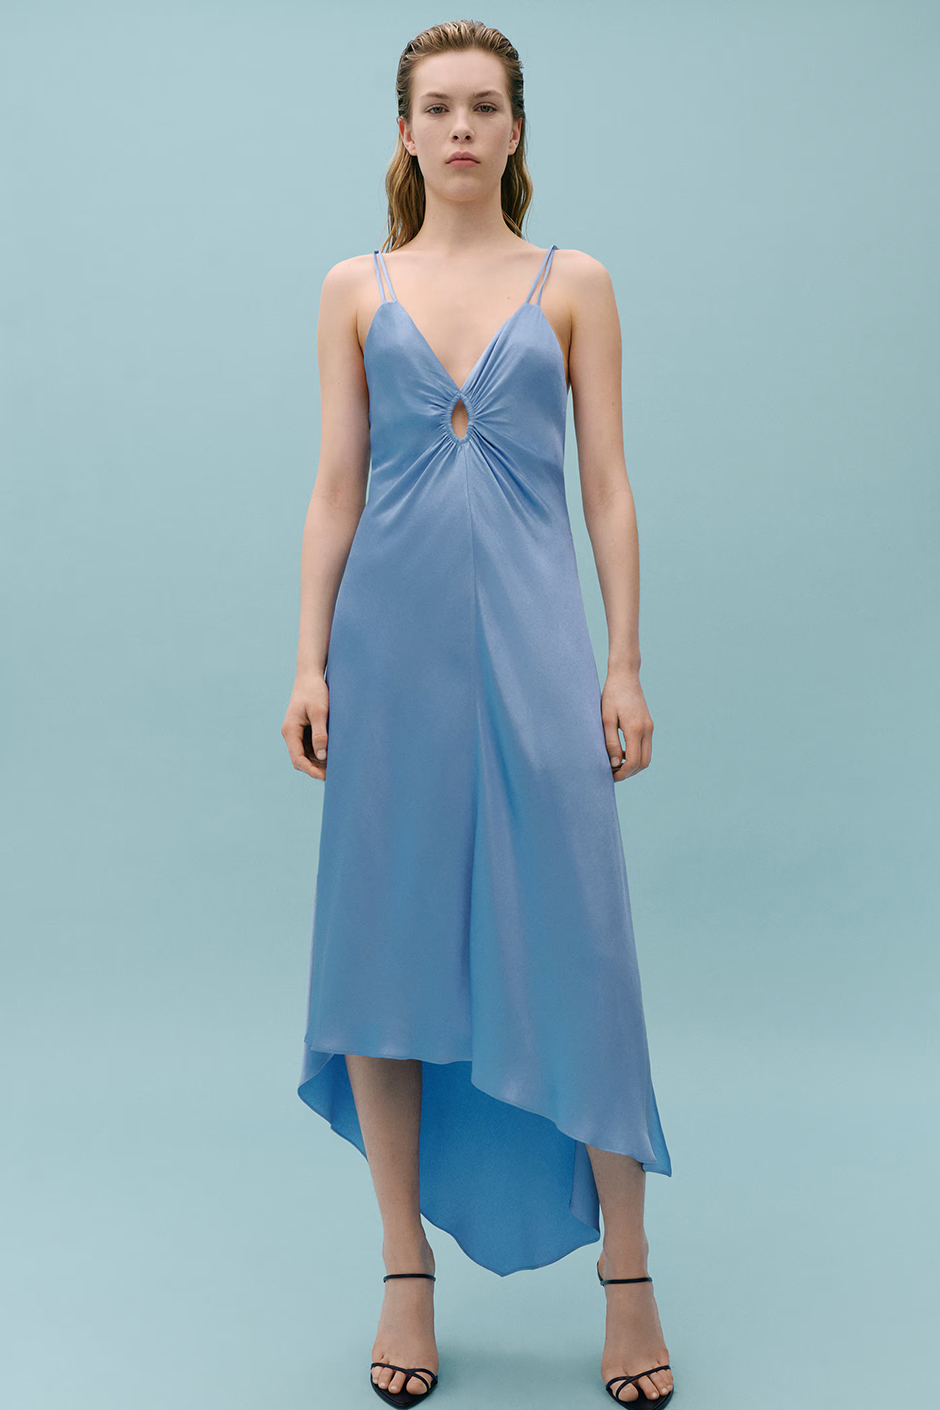 Pale blue satin asymmetrical dress from Mango in collaboration with Victoria Beckham as a summer wedding guest dress idea